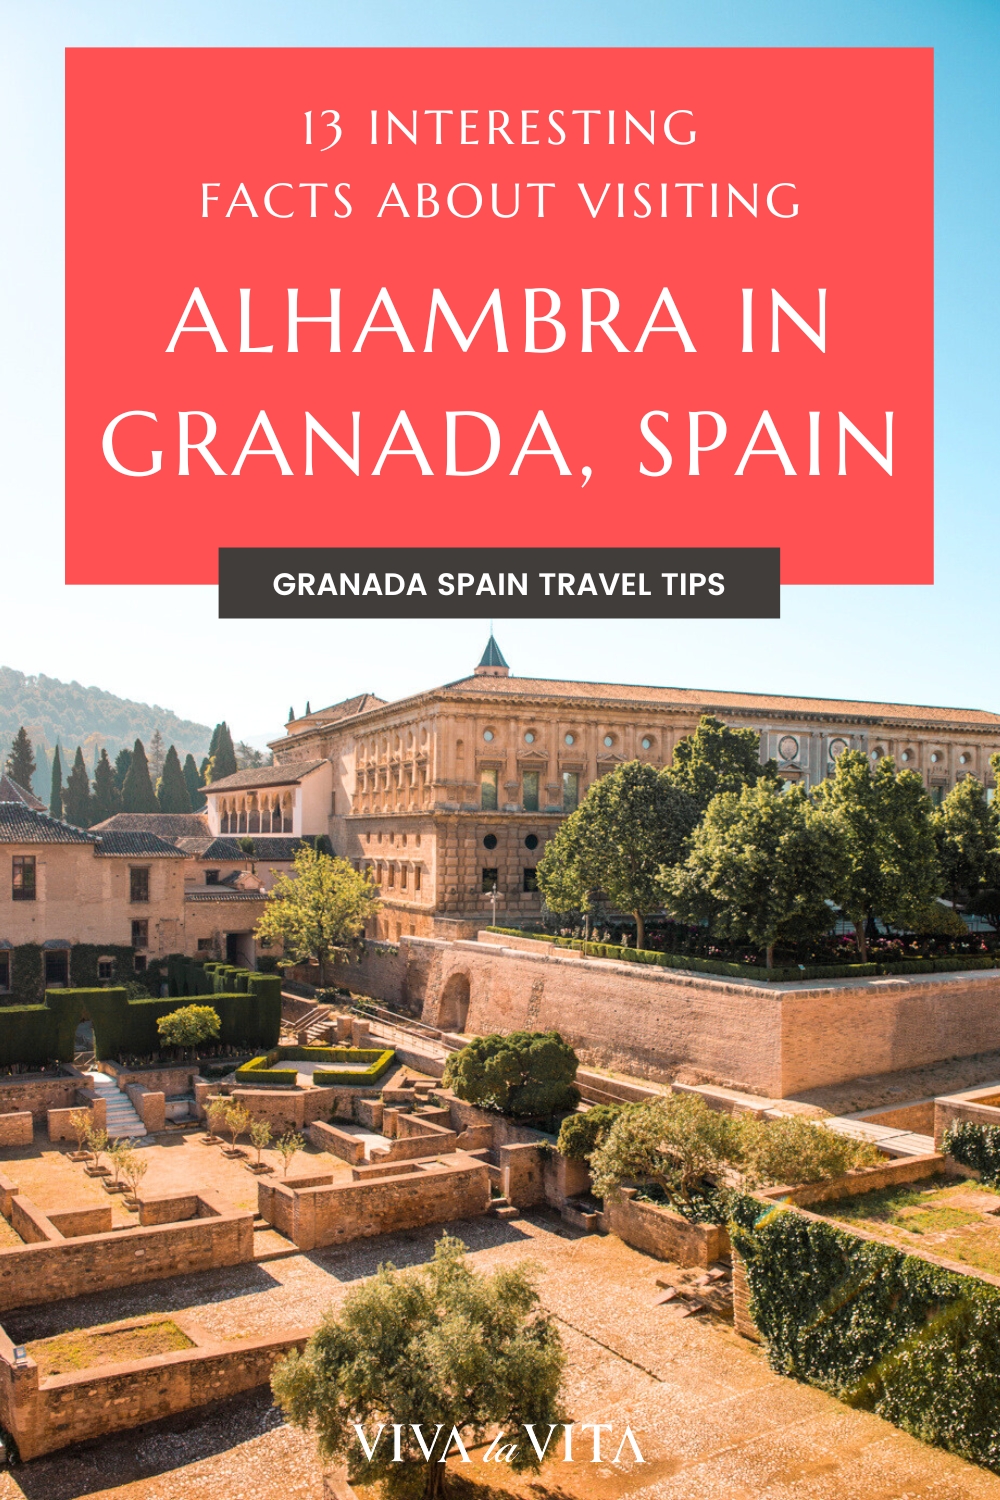 Pinterest image showing the courtyard of the Alhambra, with a headline: 13 interesting facts about visiting the Alhambra in Granada, Spain, Granada Spain travel tips